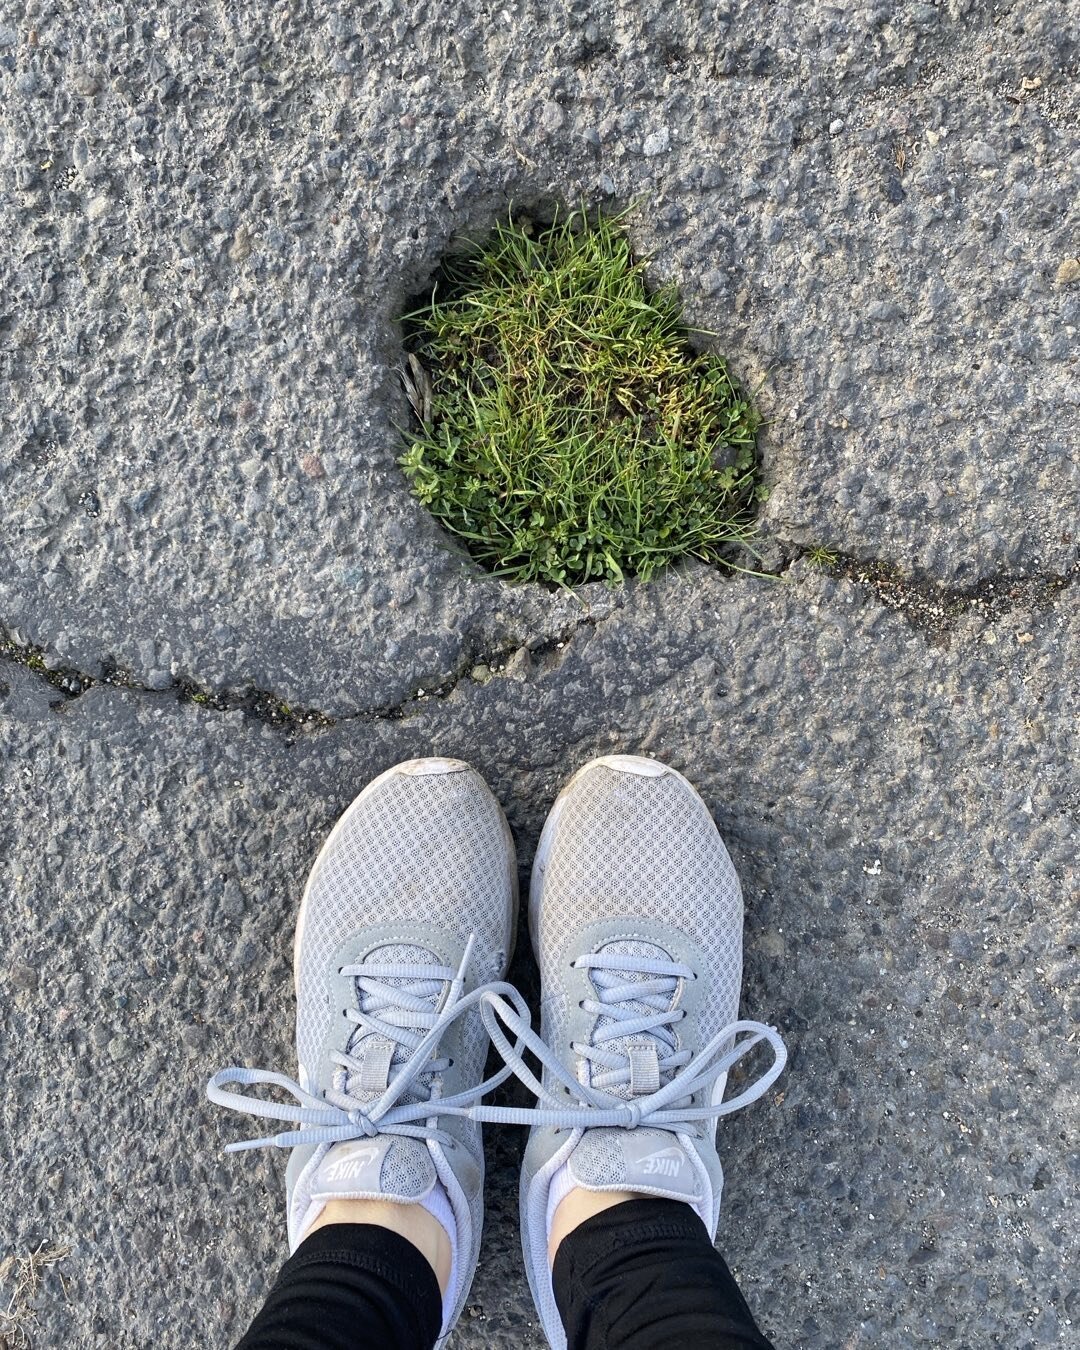 I saw this tiny patch of grass in the middle of the street on my walk the other morning. Looking at it, I had the thought &ldquo;nature abhors a vacuum.&rdquo;

It&rsquo;s impressive, and amazing that life can persist with the very smallest of openin